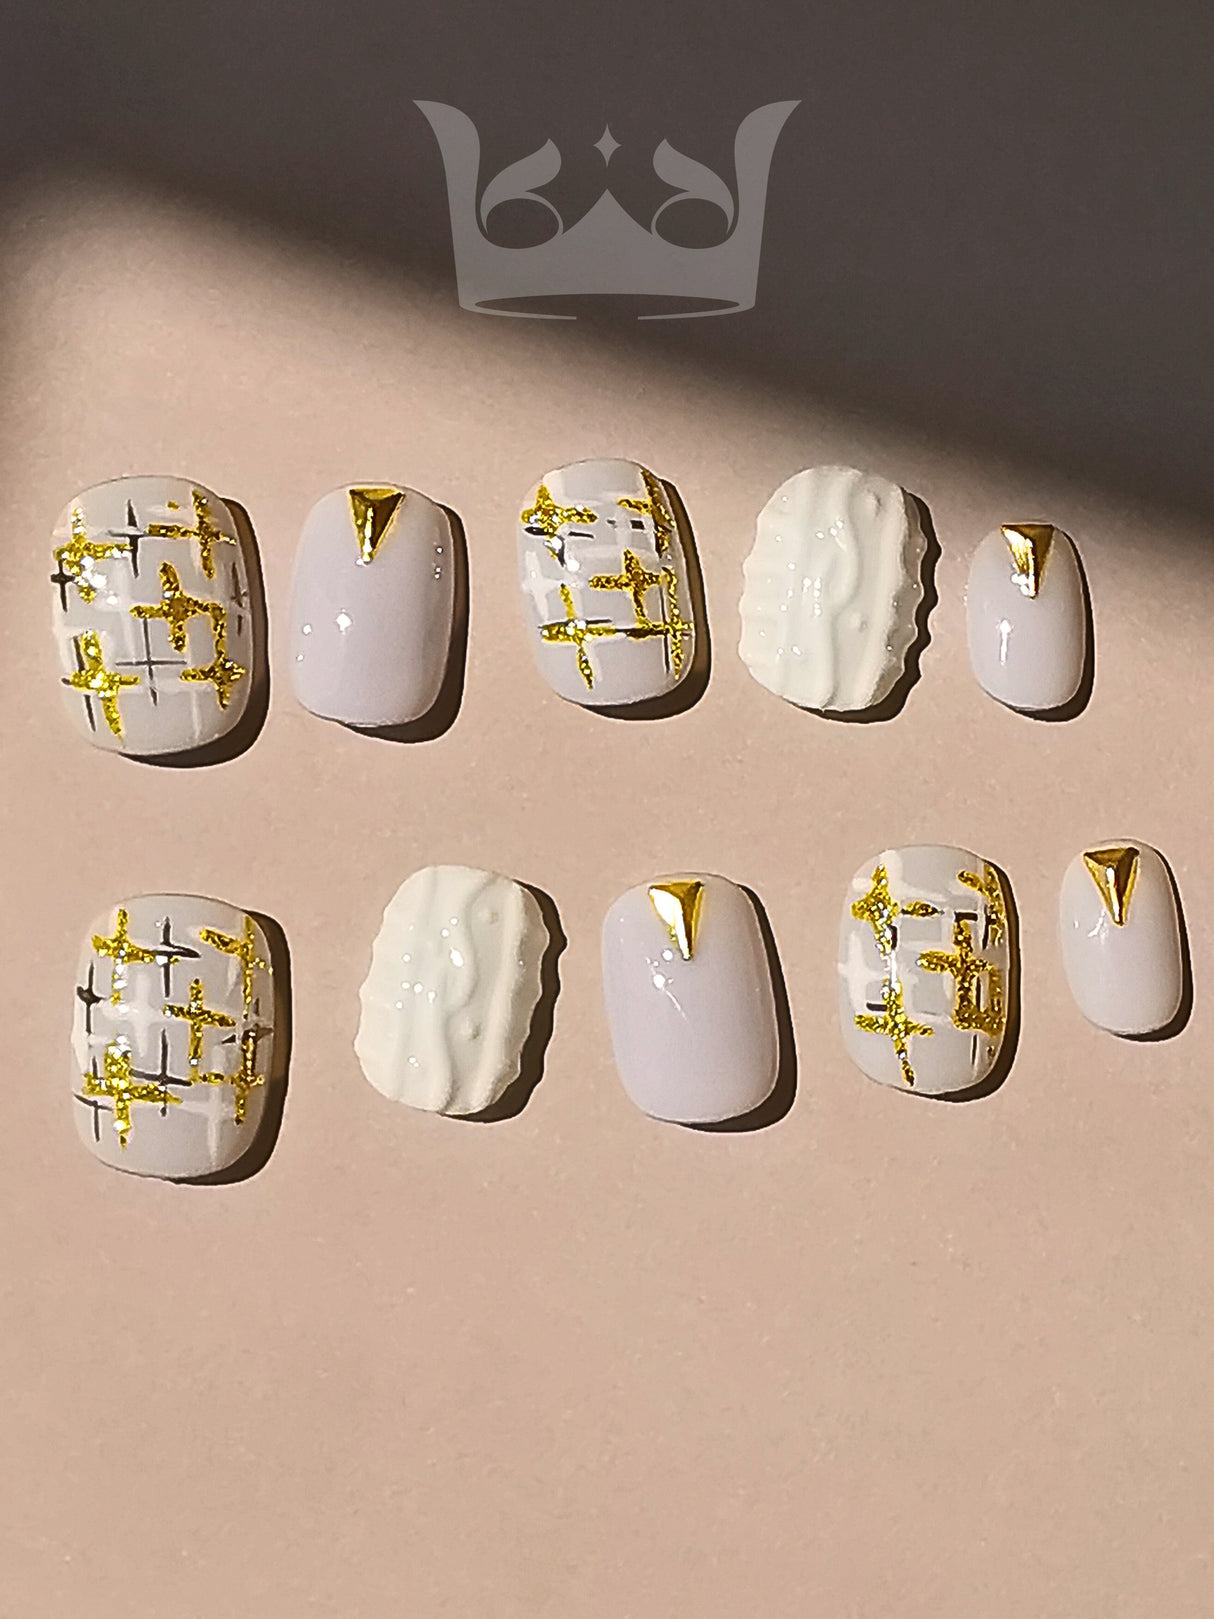 These press-on nails are perfect for a special occasion, featuring a pastel purple base with gold geometric patterns and a textured accent nail for a chic and fancy look.